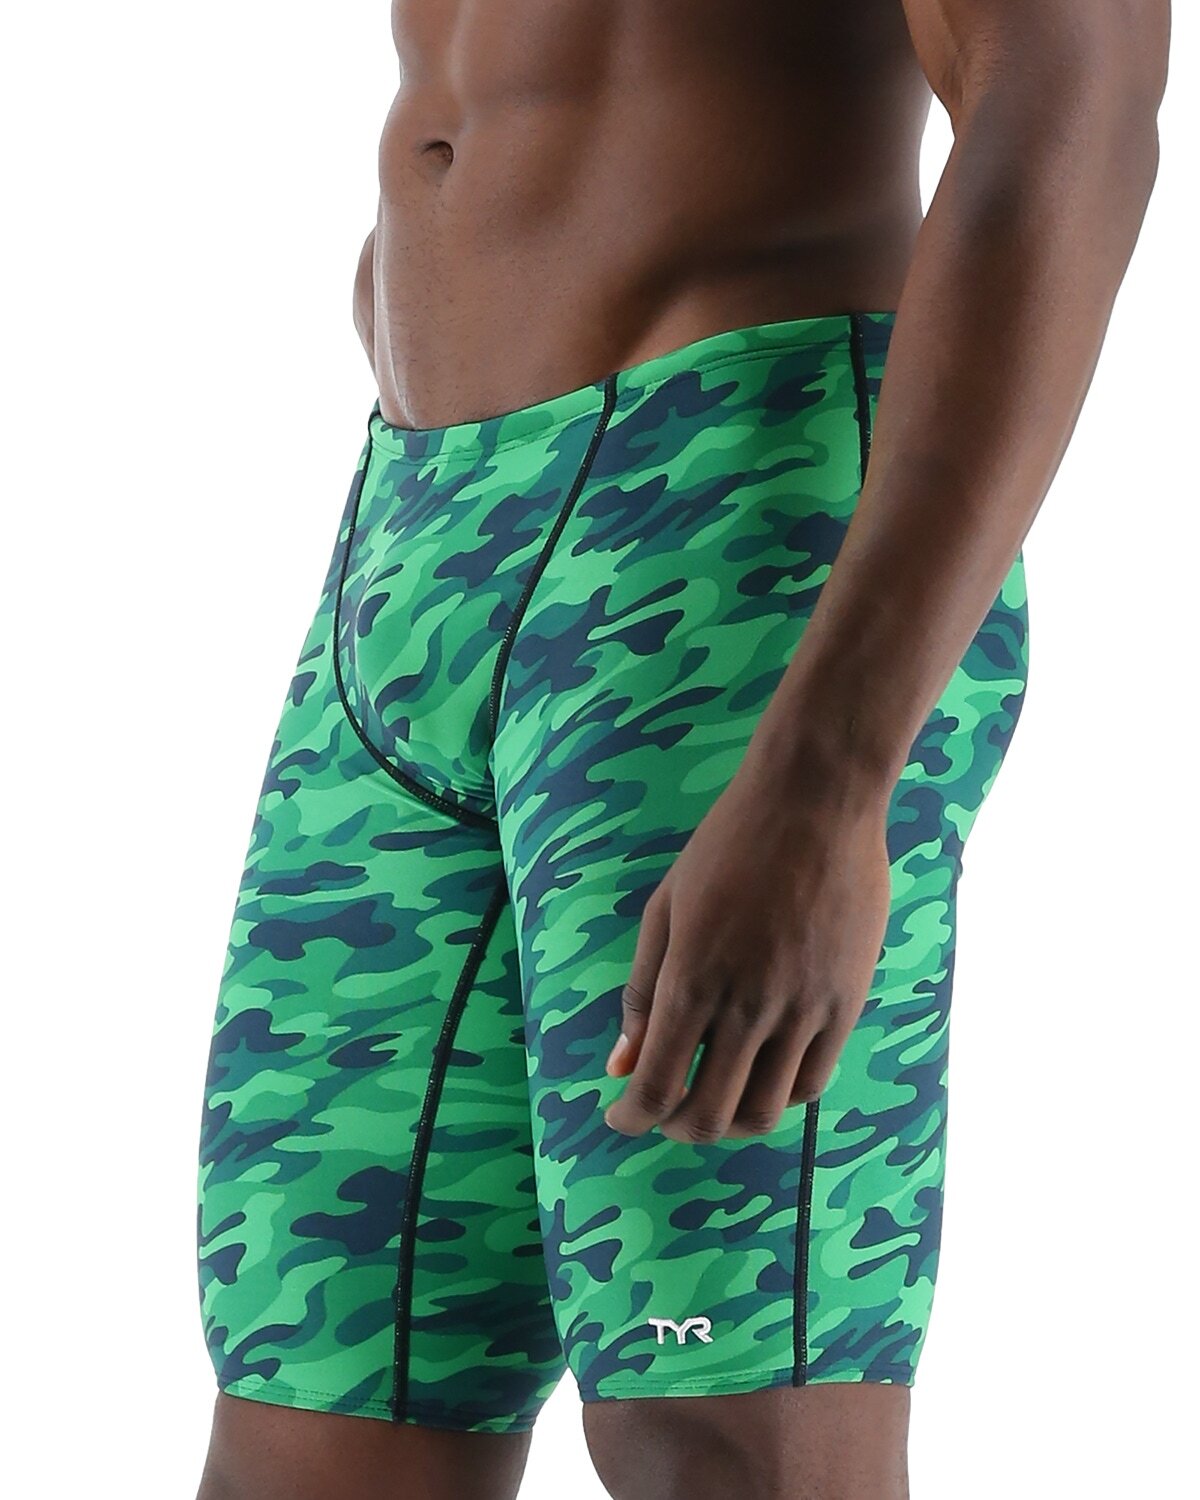 TYR Green Camo Jammer Size 38